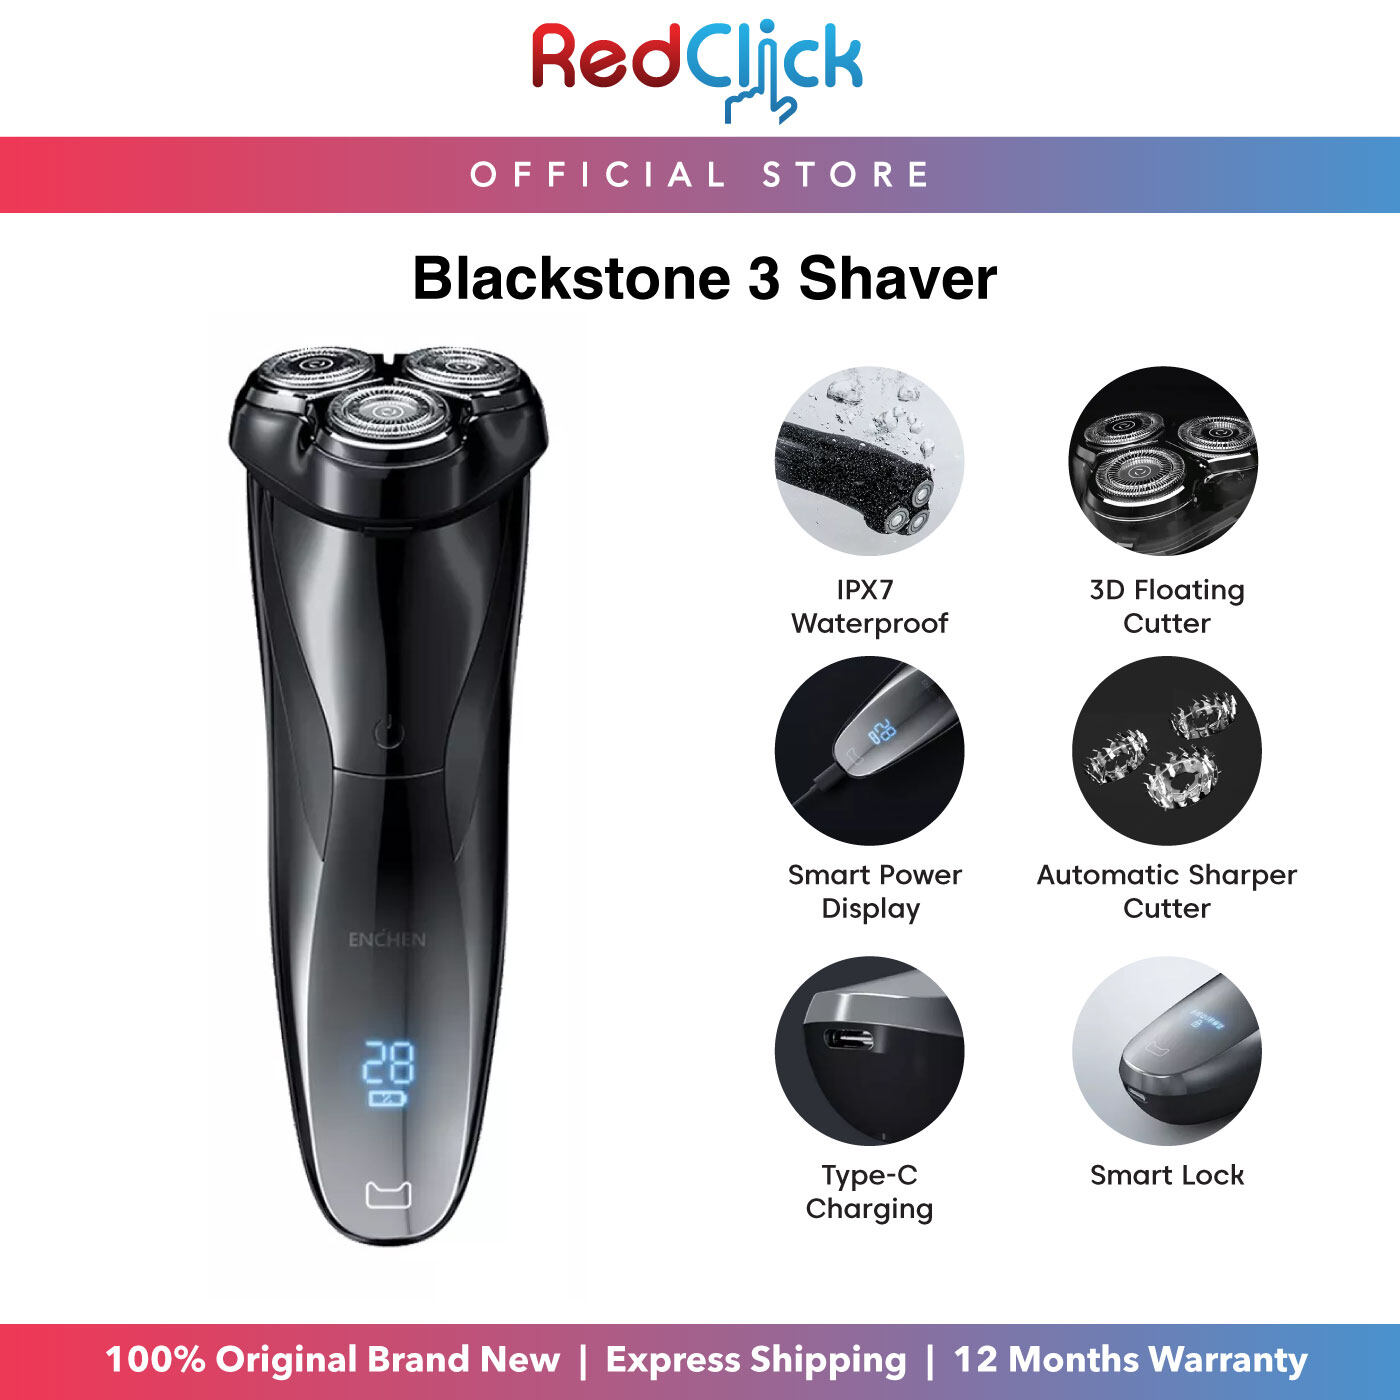 Enchen Blackstone 3 Electric Shaver 3D Floating Cutter Head IPX7 Waterproof